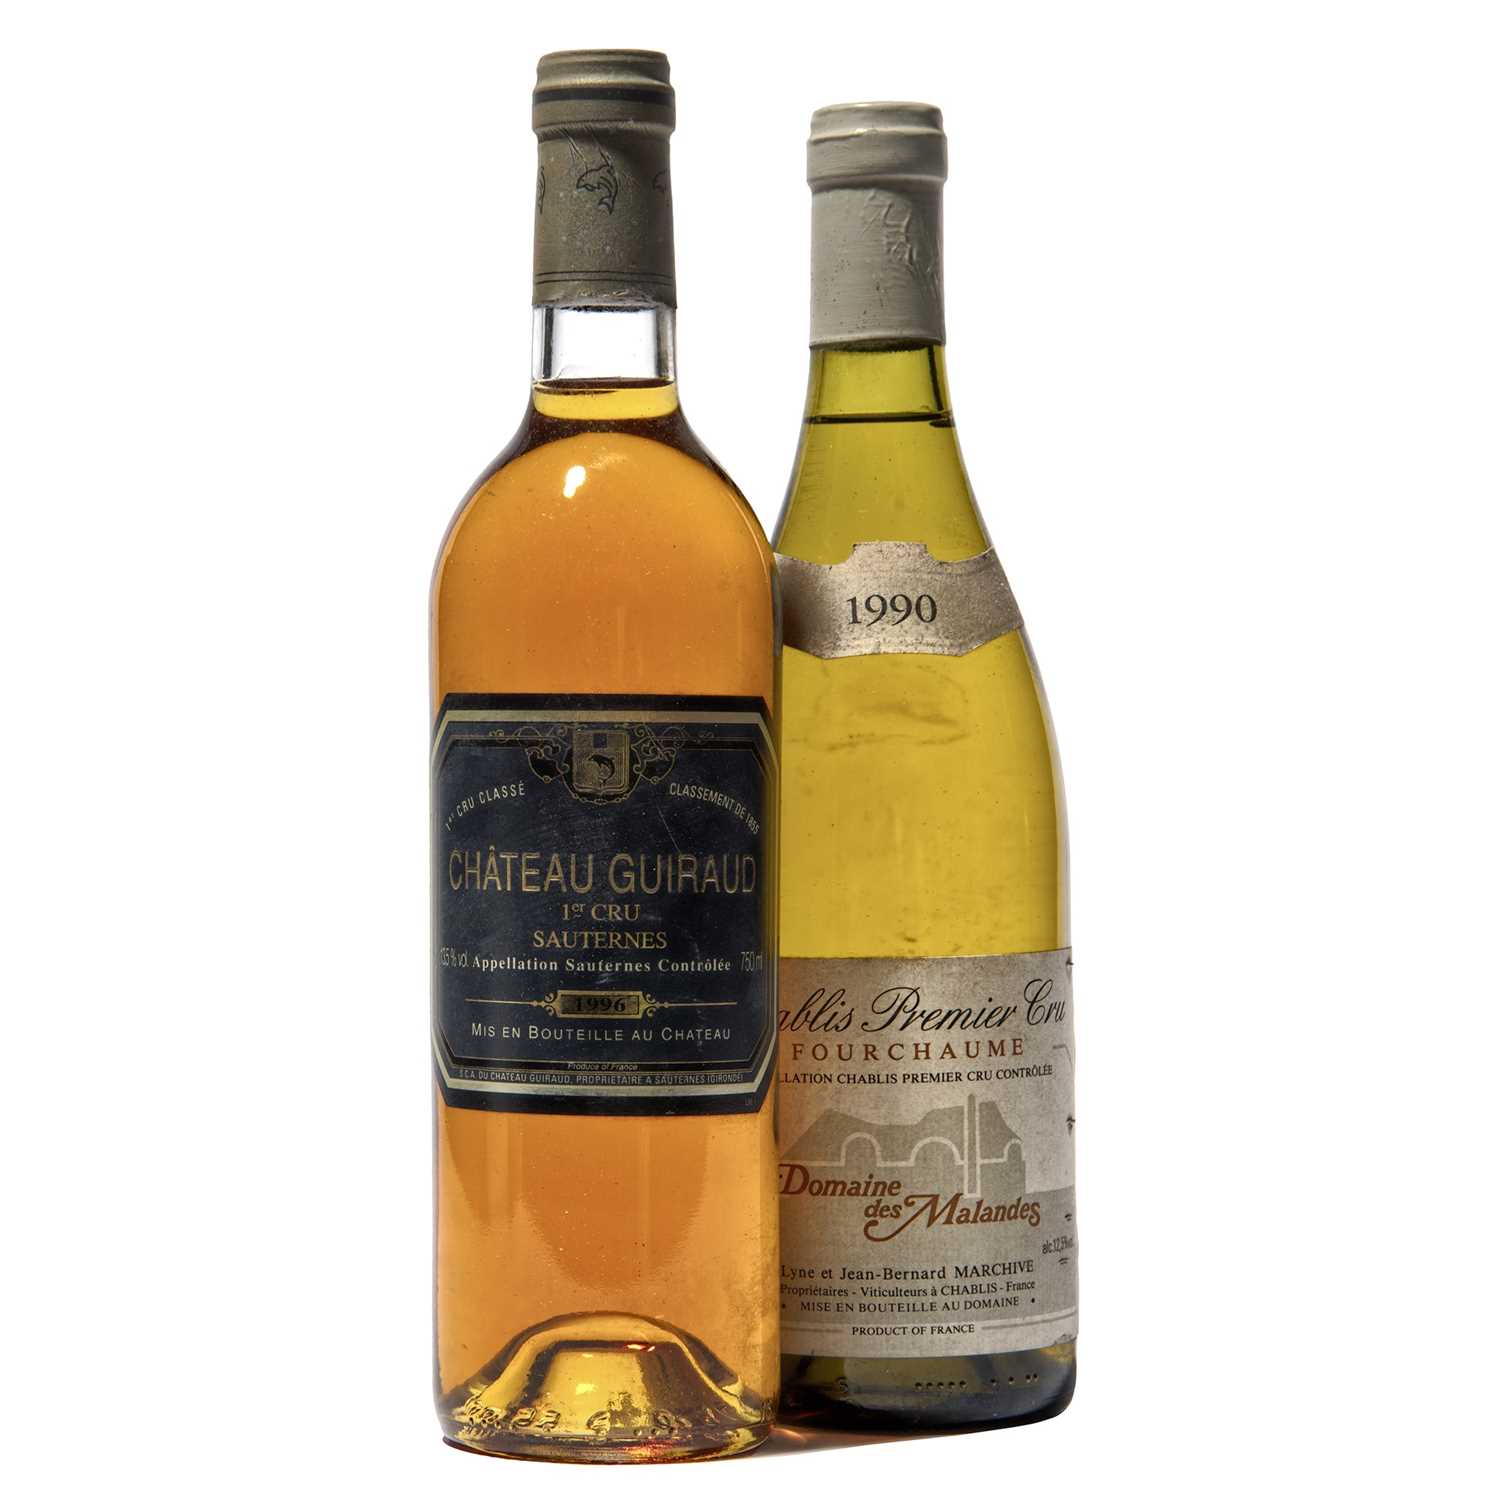 Lot 89 - 4 bottles Mixed Sauternes and White Burgundy